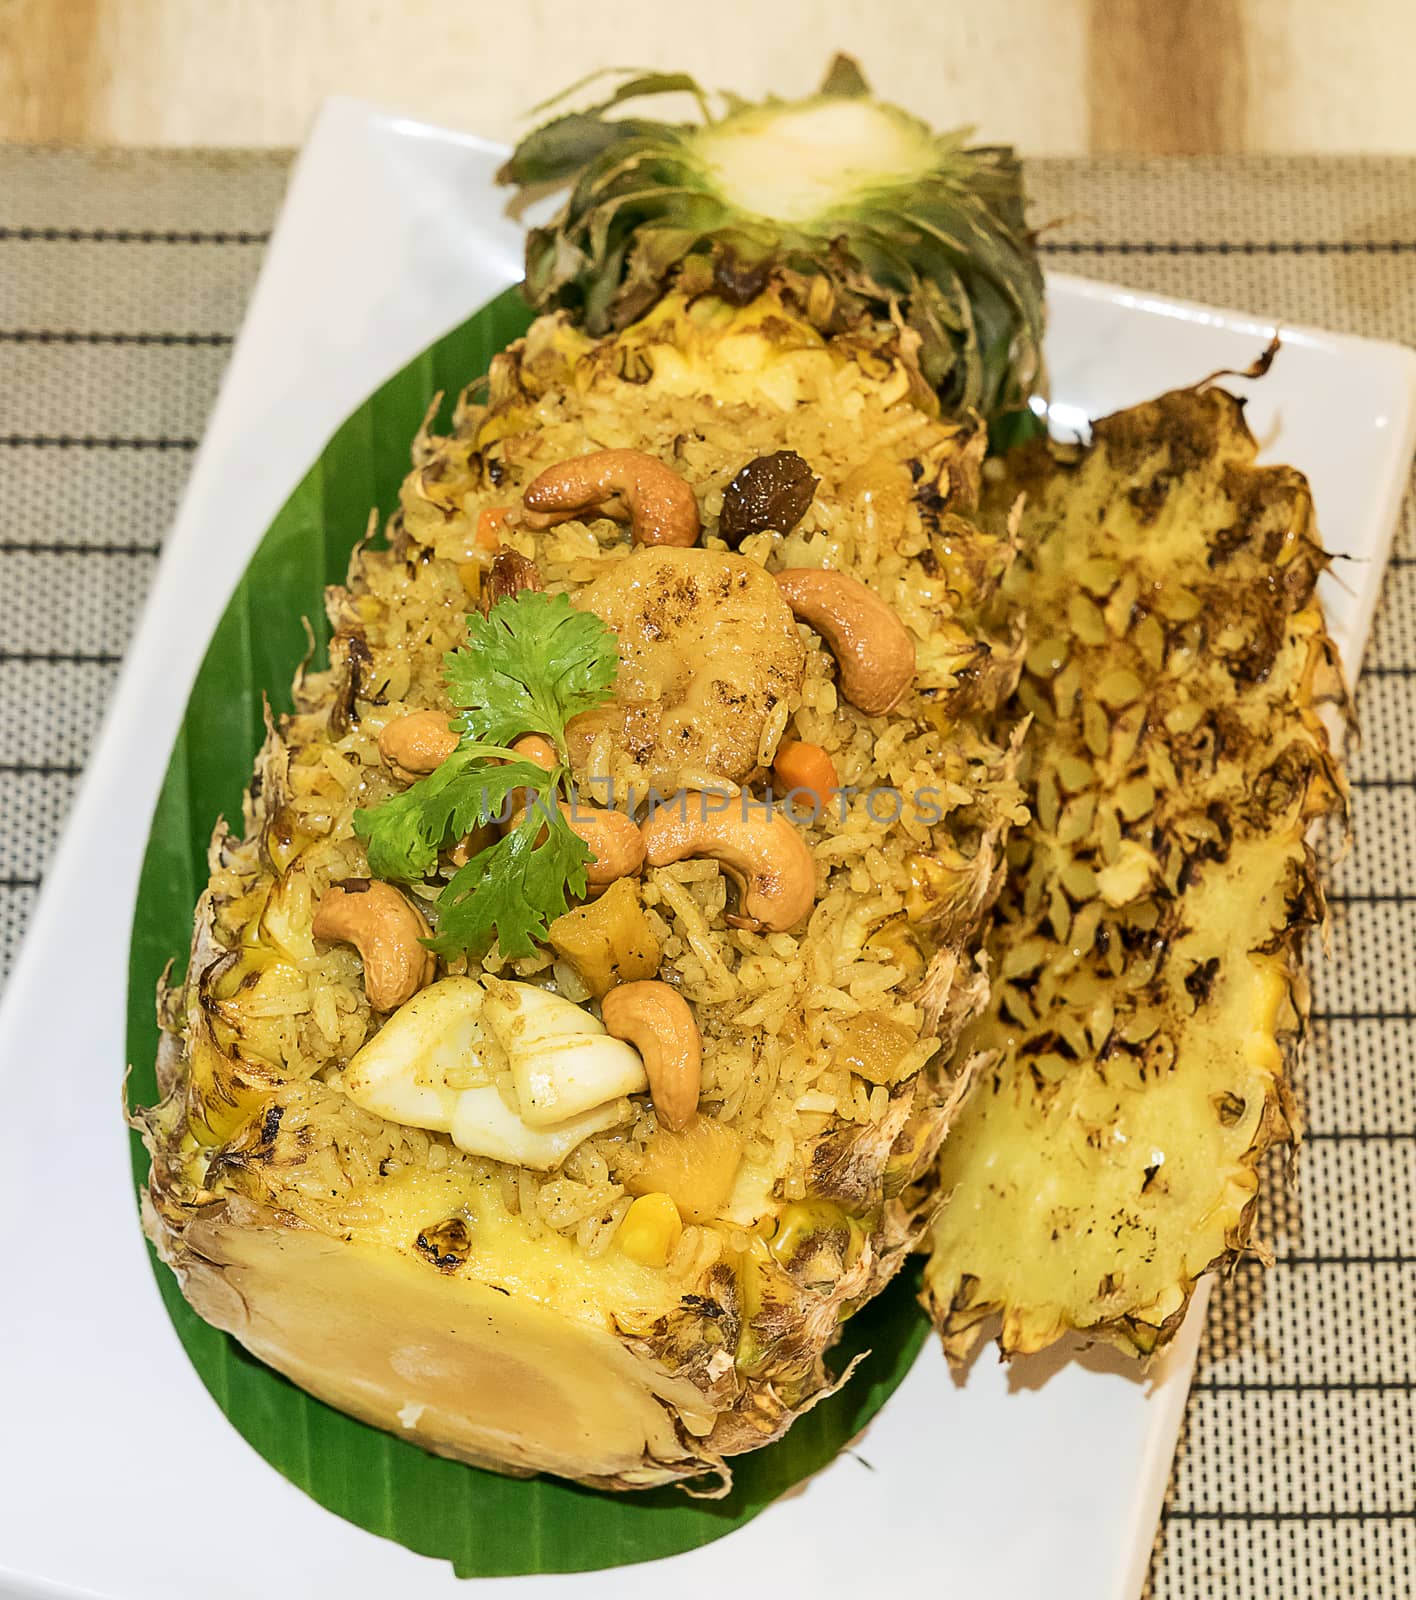 Pineapple fried rice by vichie81